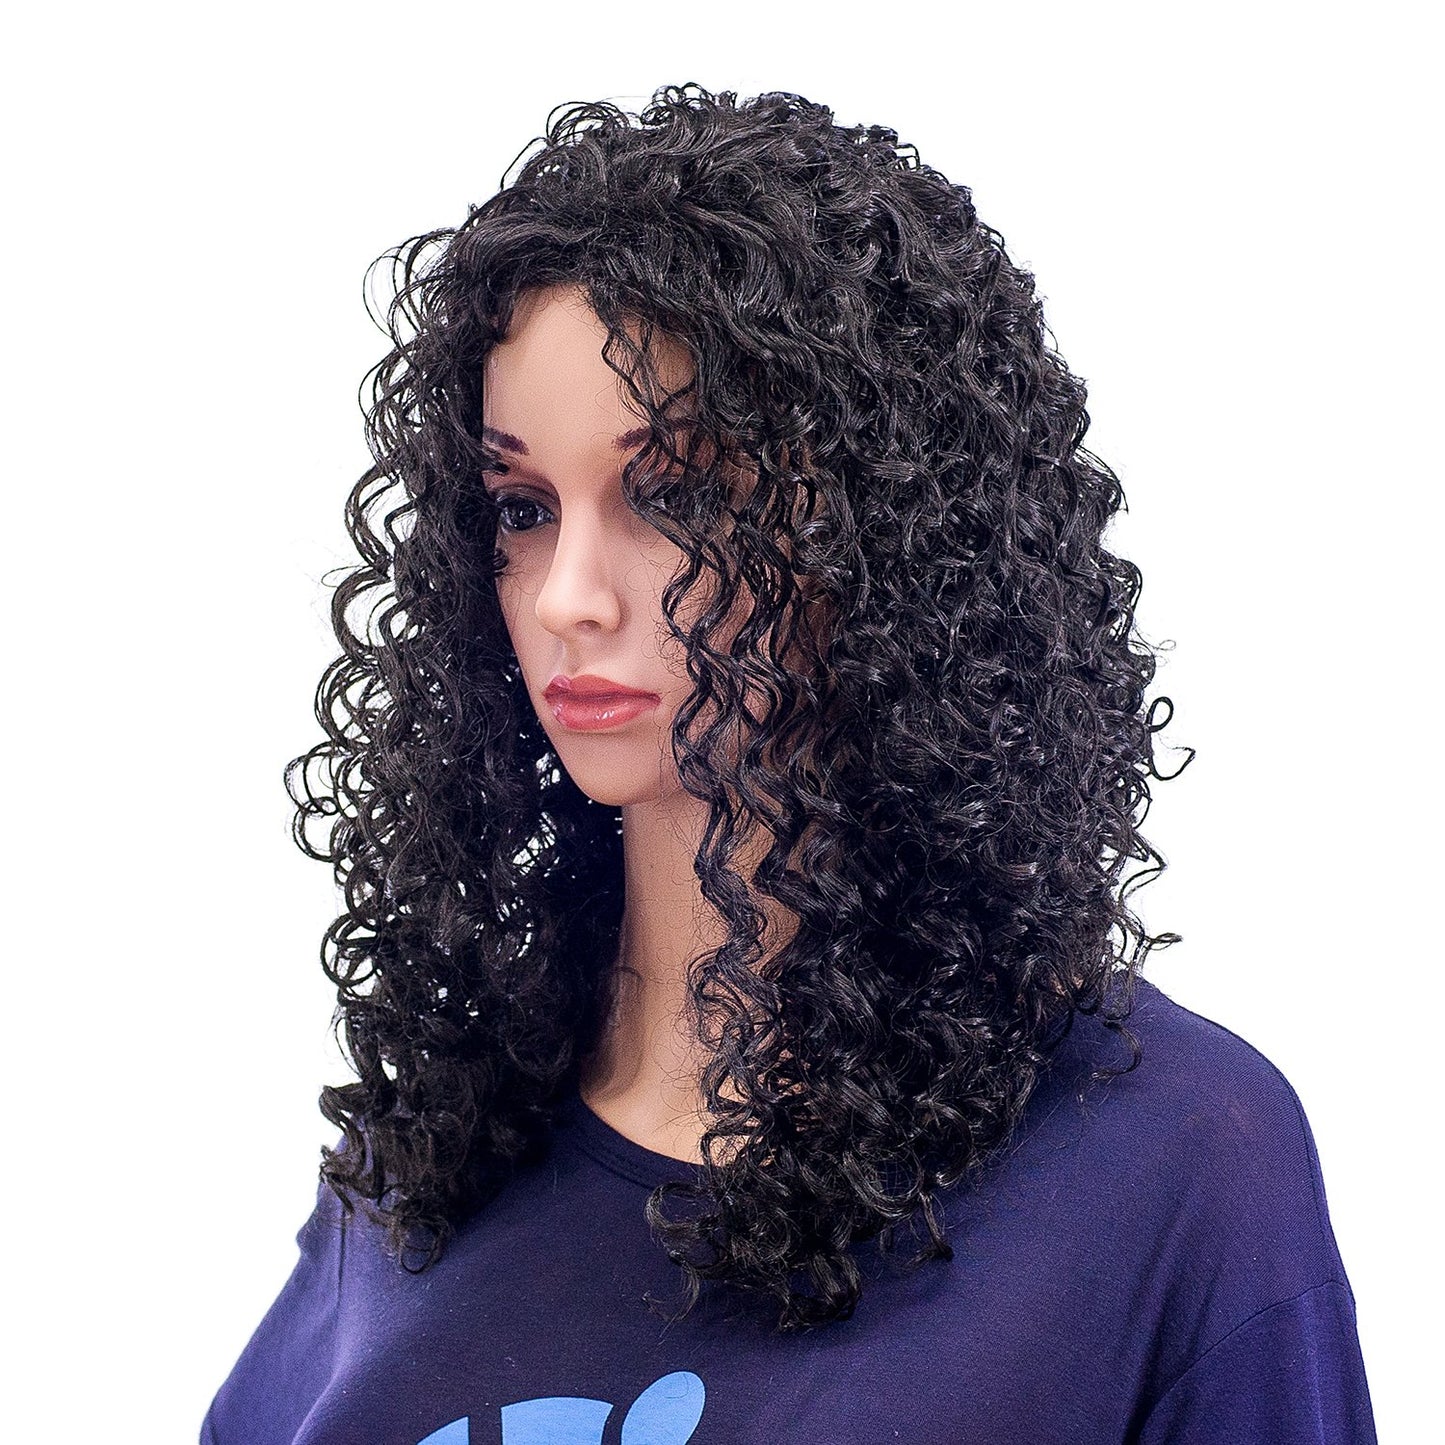 Lush Locks Super Curly 20-Inch Long Big Bouffant Curly Wigs for Women Synthetic Heat Resistant Fiber Hair Pieces with Wig Cap